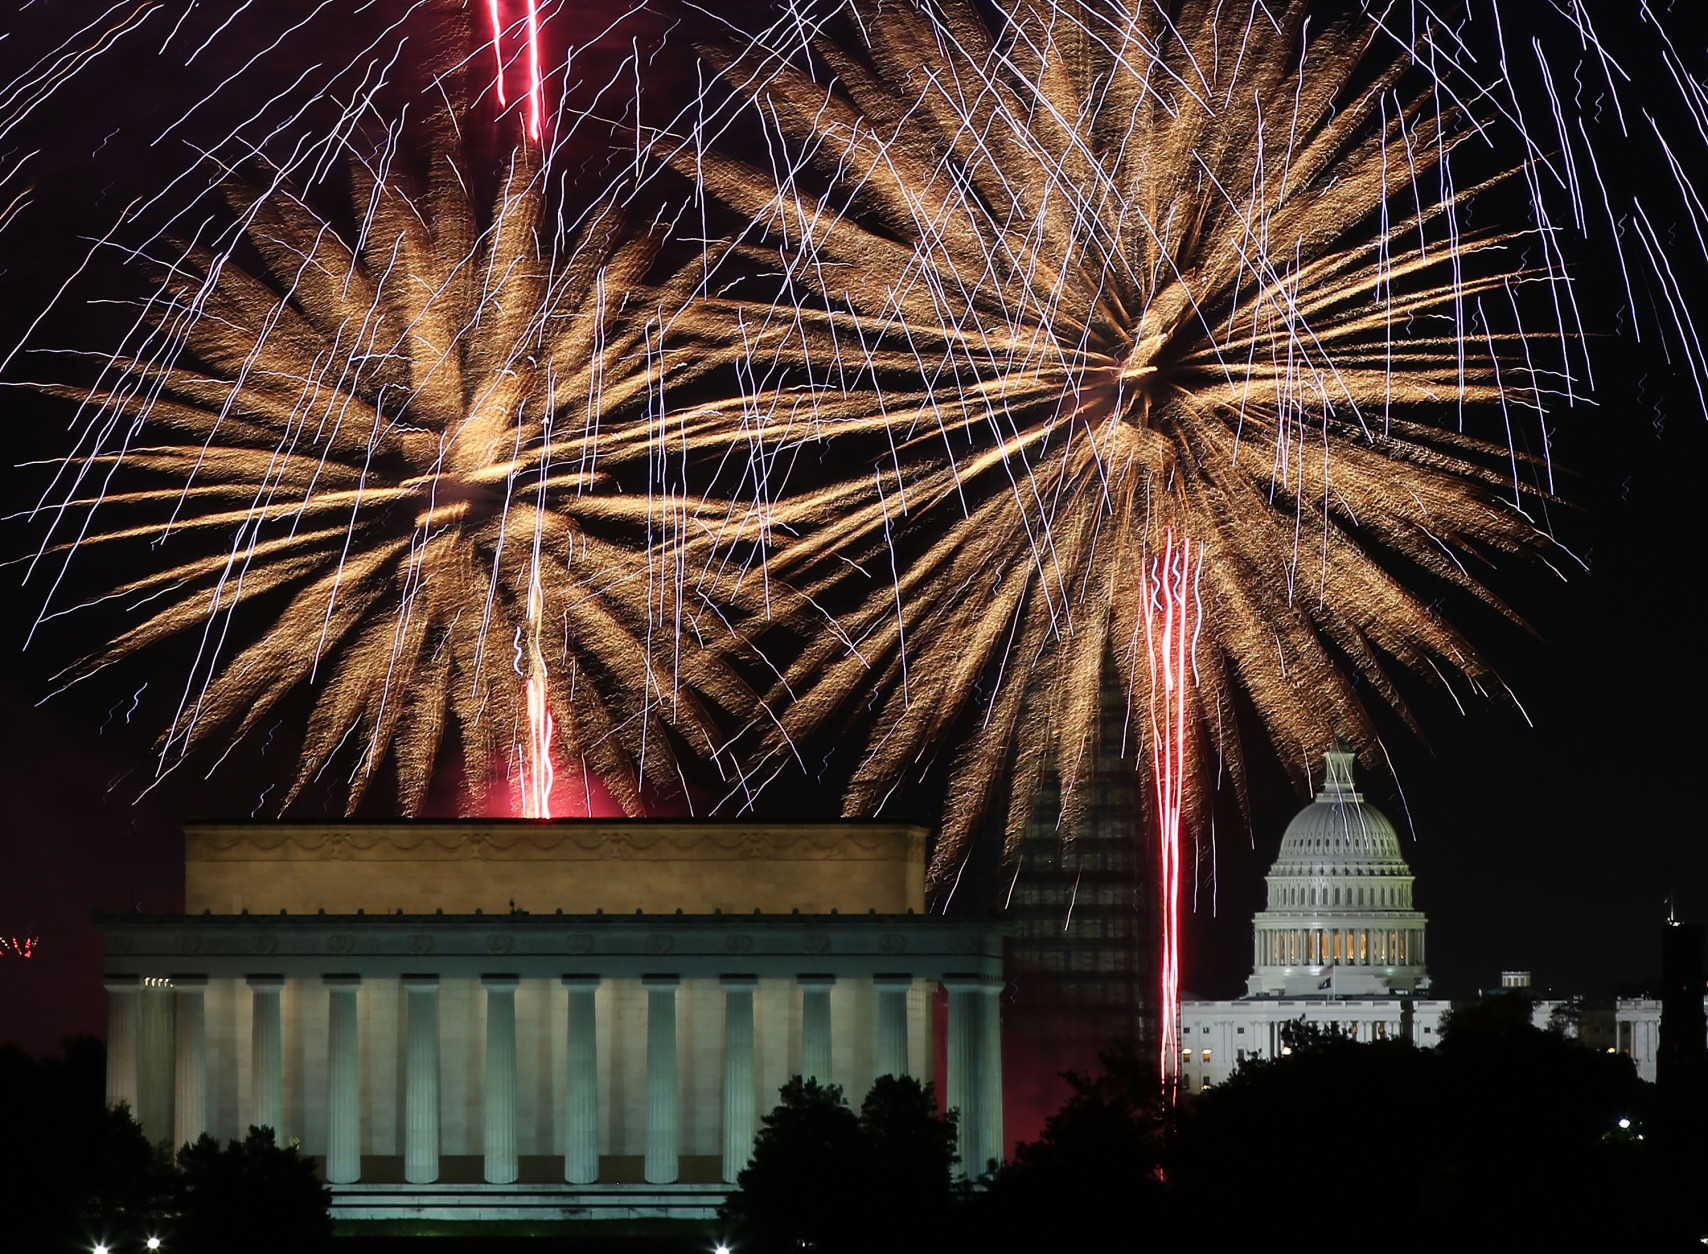 Fireworks light up the sky over the Lincoln Memorial, Washington Monument, and the U.S. Capitol on July 4, 2013 in Washington, DC. July 4th is a national holiday with the nation celebrating its 238th birthday.  (Photo by Mark Wilson/Getty Images)